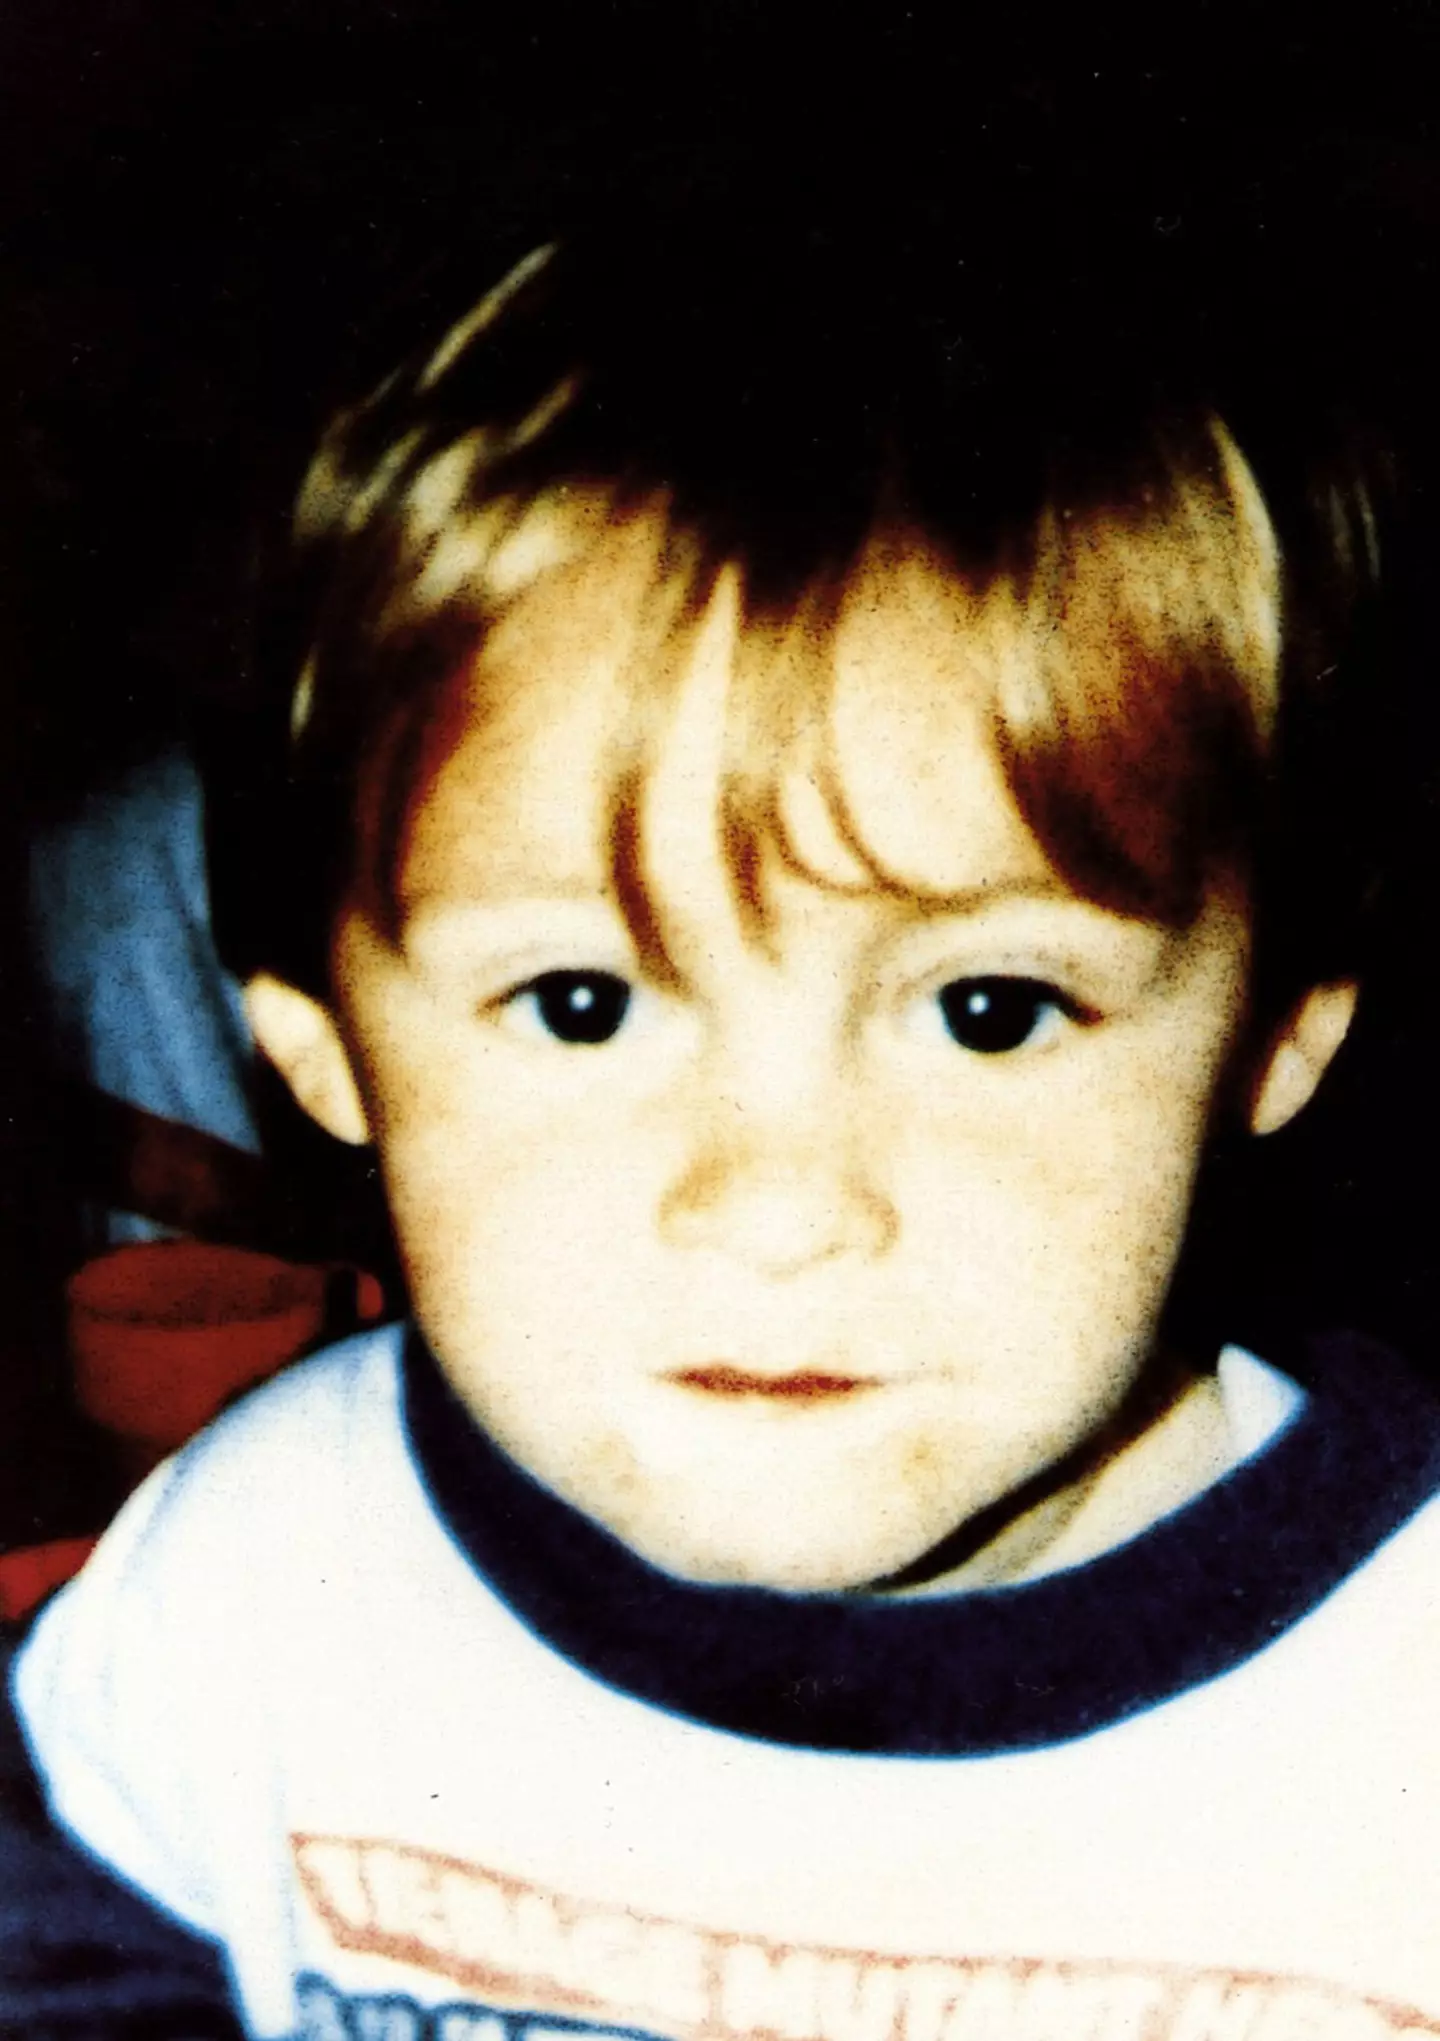 James Bulger was just two when he was kidnapped and murdered.